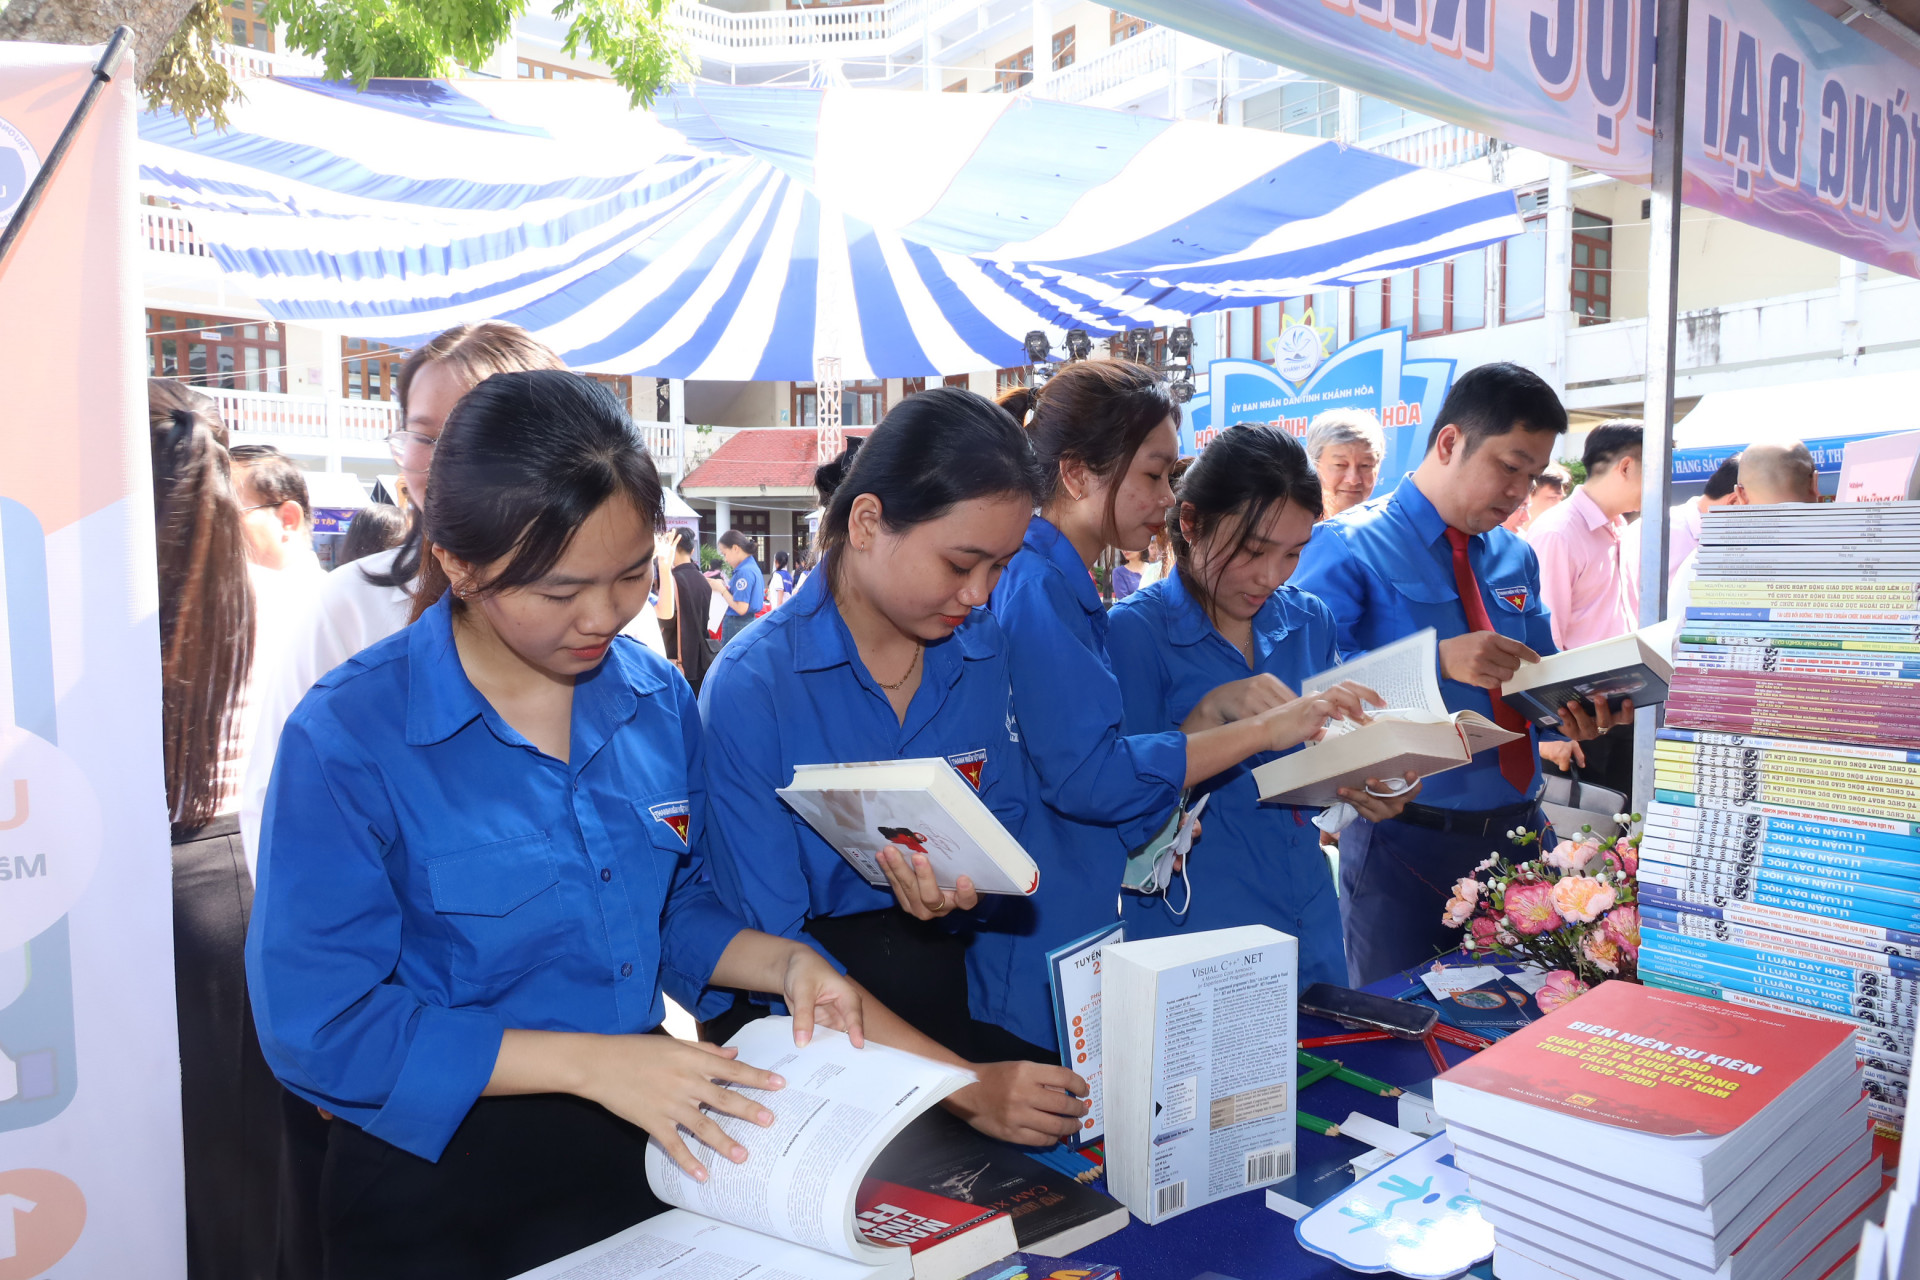 Students reading books at the book stall of Khanh Hoa University

